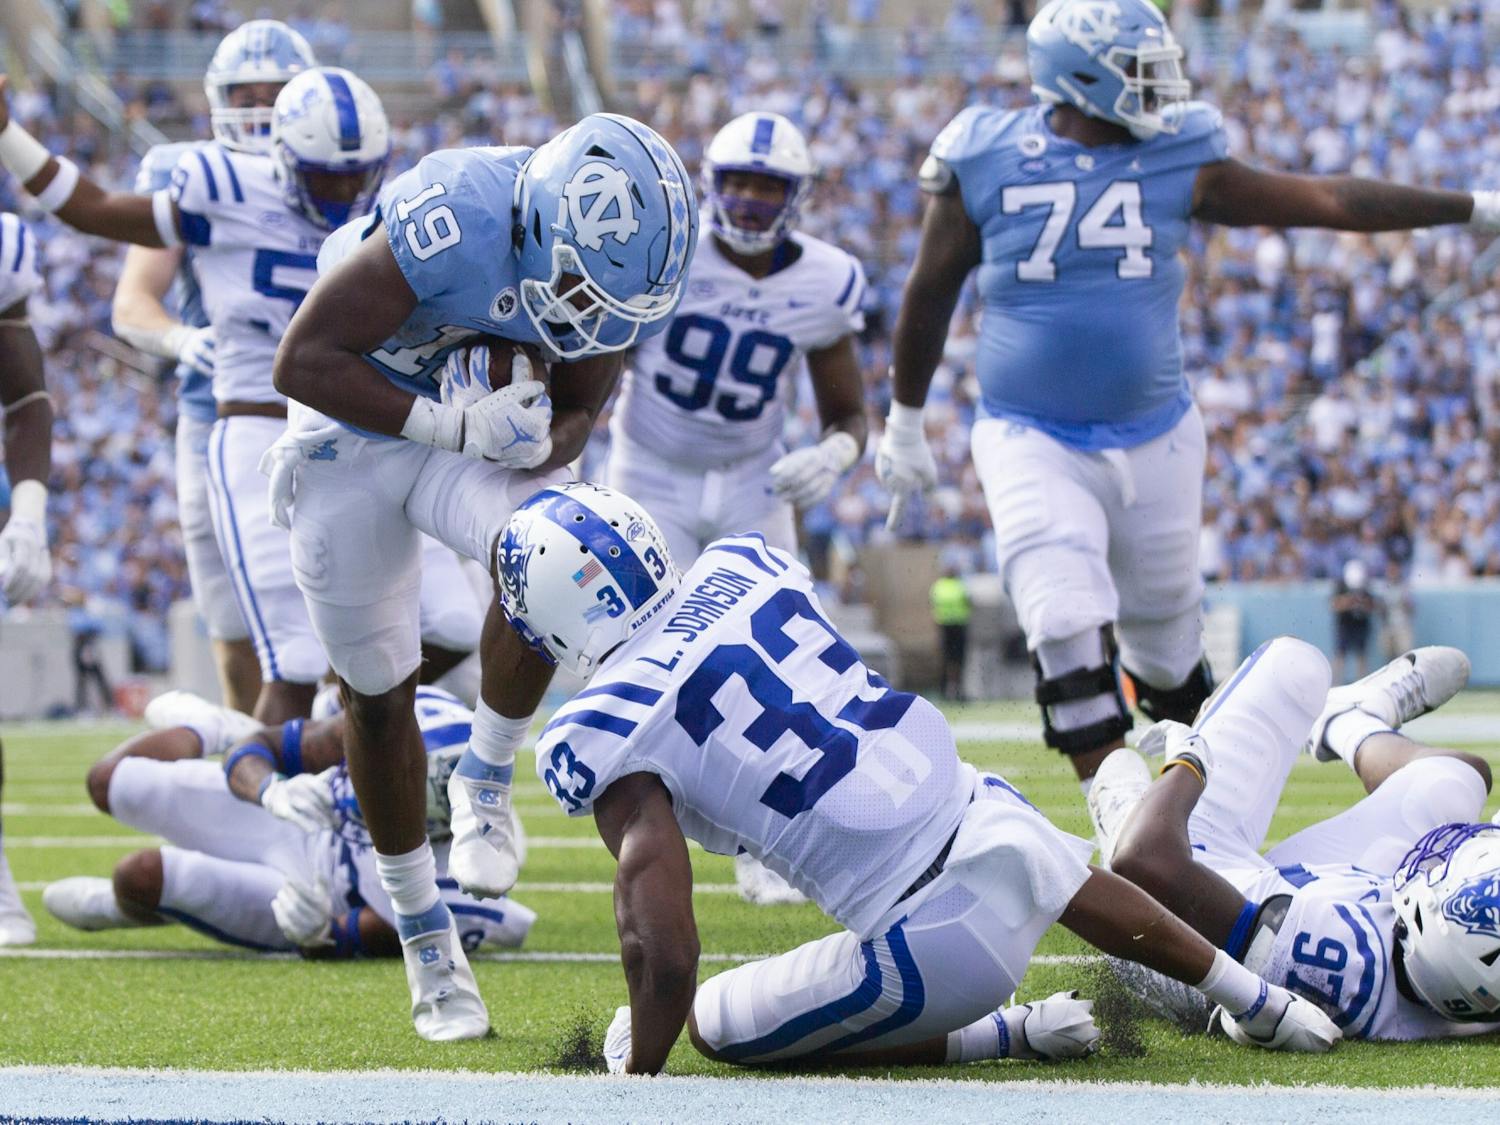 Graduate running back Ty Chandler (19) enters the end zone and brings the Tar Heels lead over Duke to 31-7. The Tar Heels defeated Duke 38-7 in Kenan Memorial Stadium on Oct. 2, 2021.